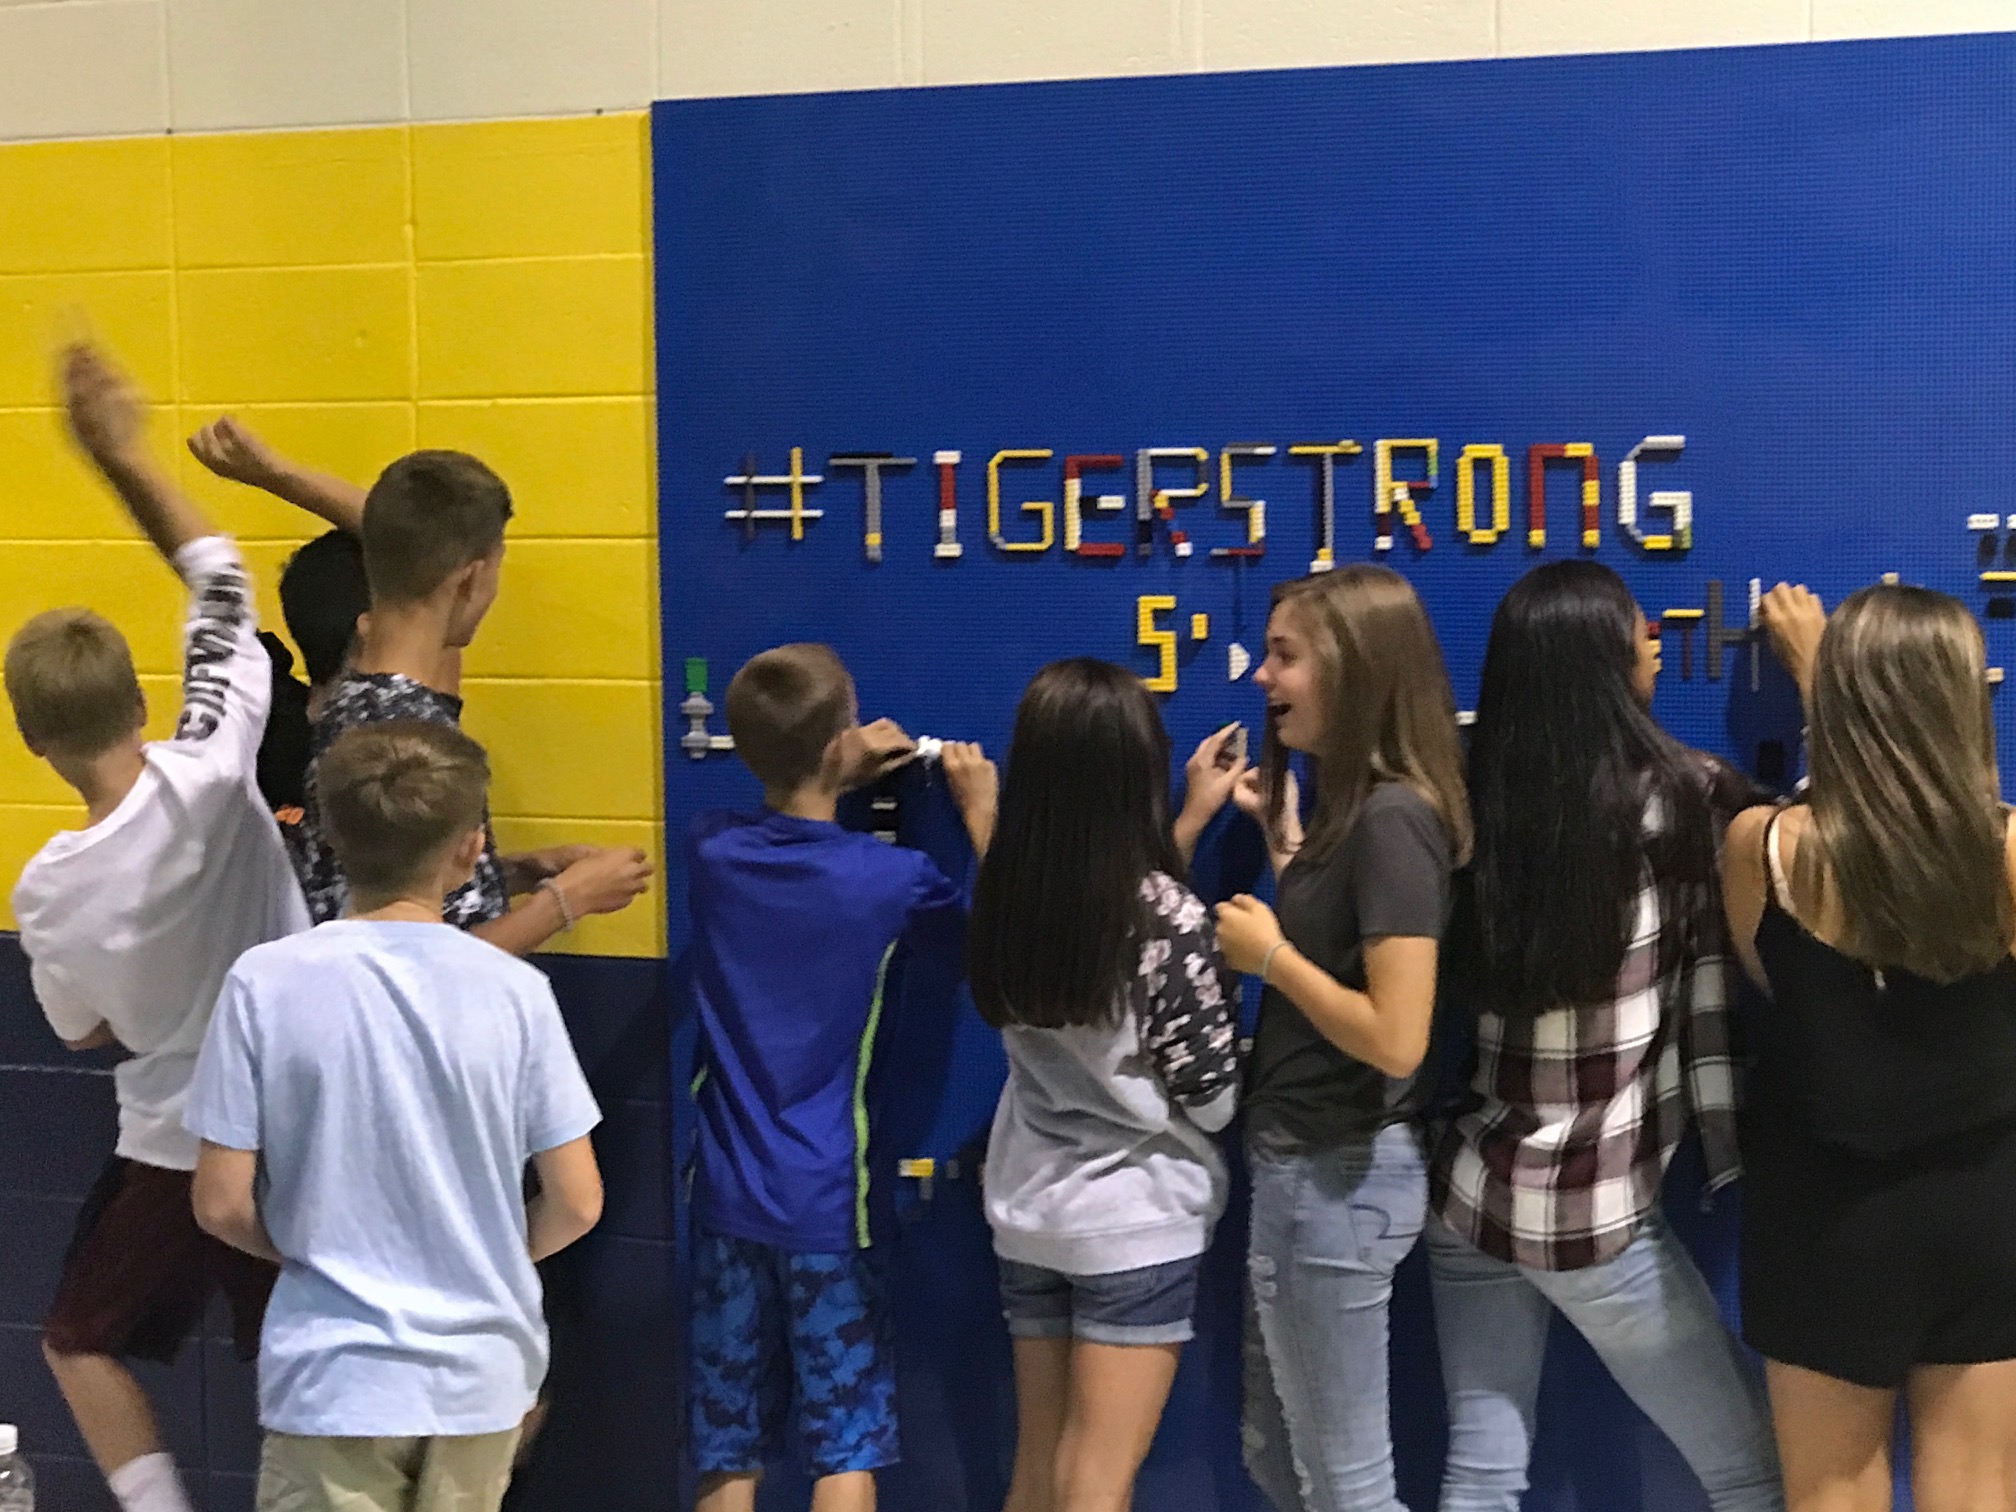 Students having fun with a lego wall.